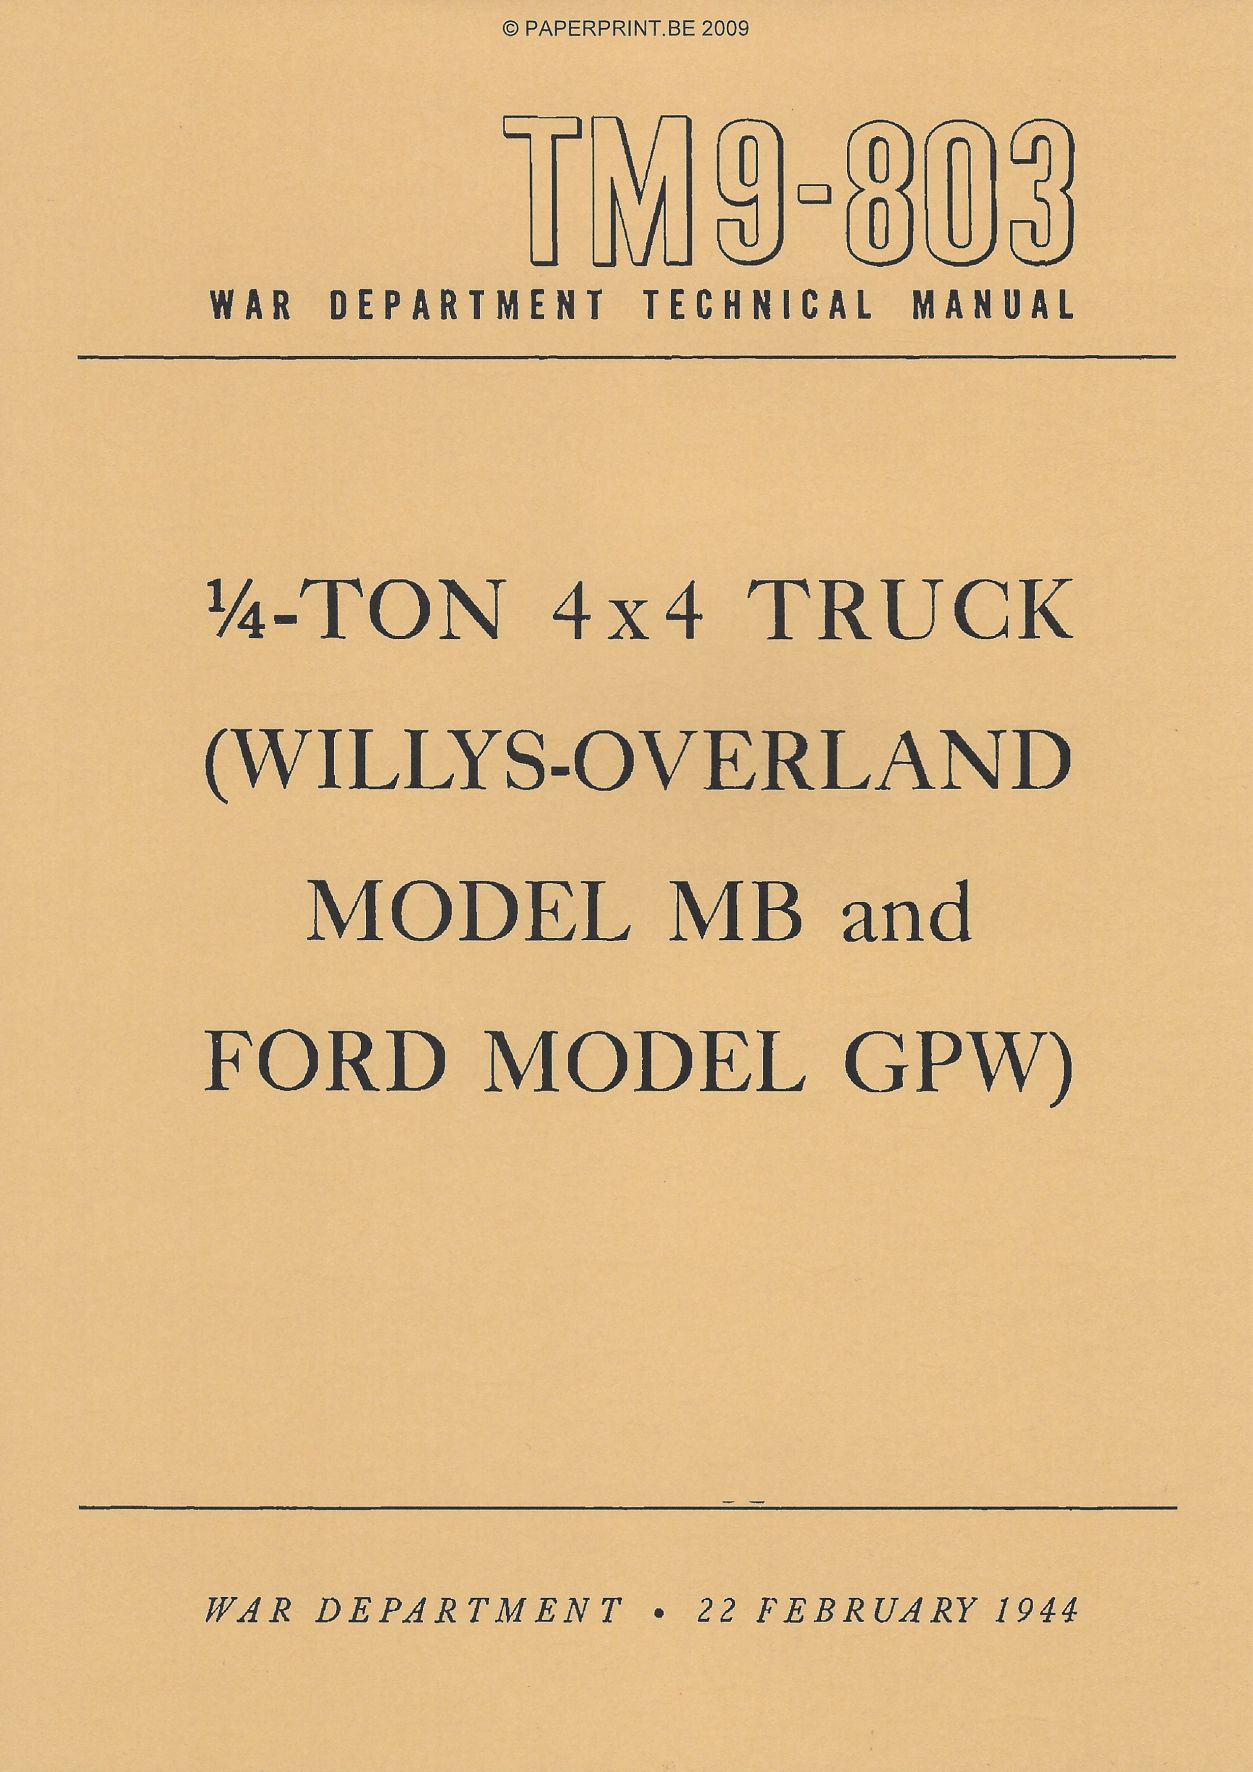 TM 9-803 US ¼ TON 4x4 TRUCK (WILLYS-OVERLAND MB AND FORD GPW)